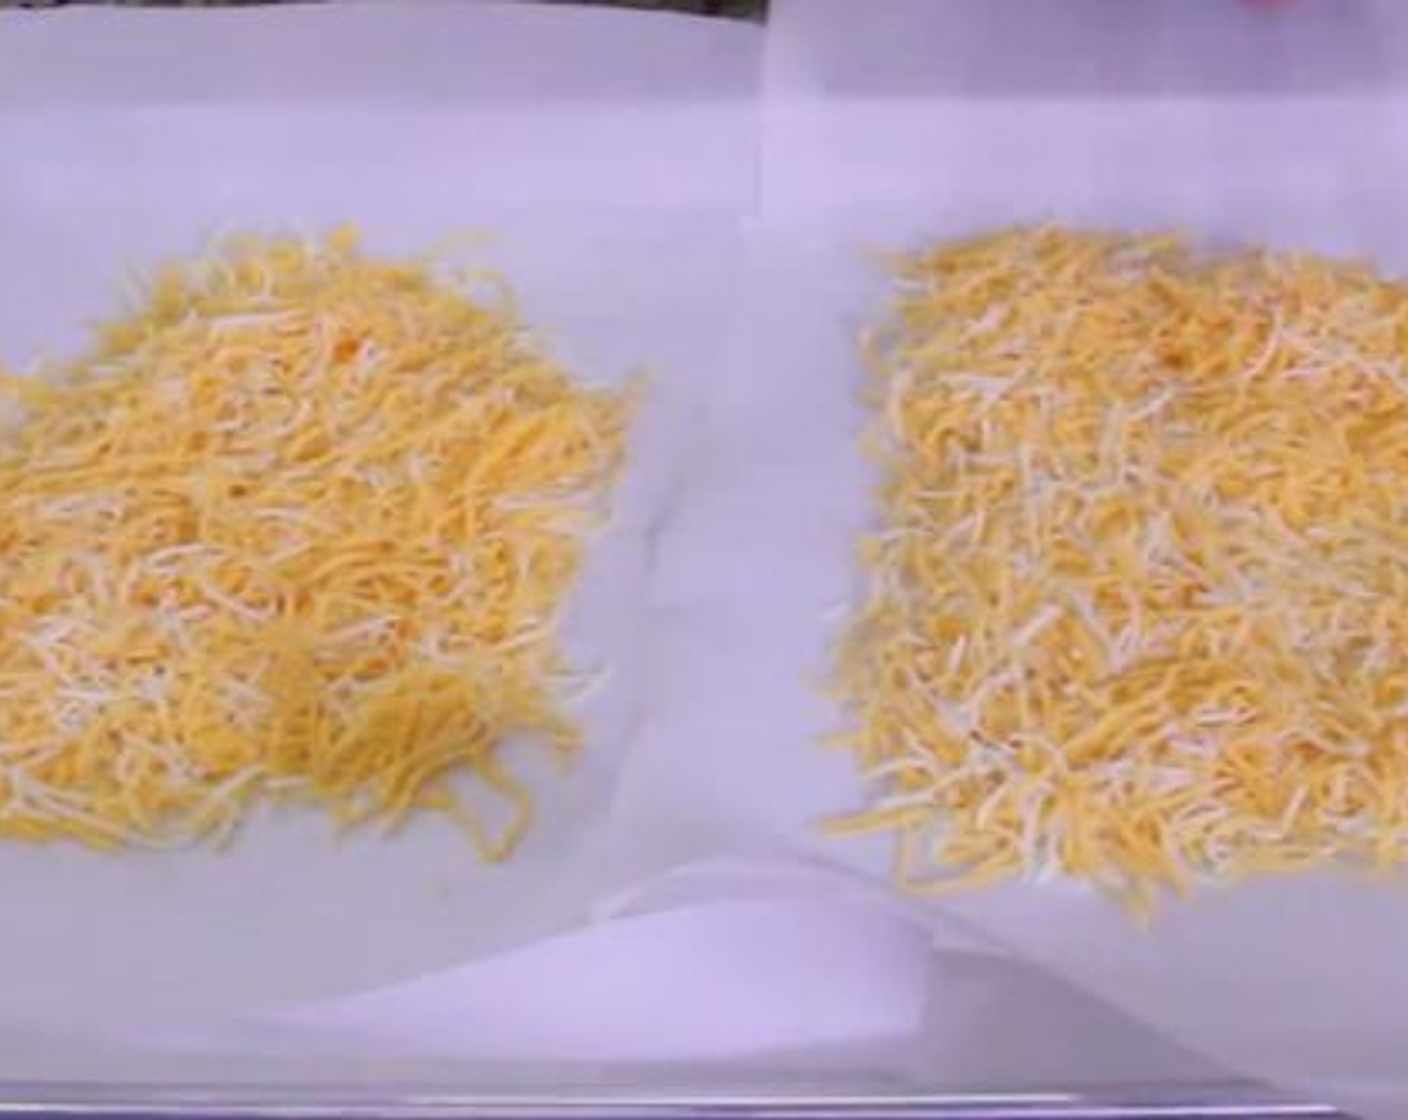 step 3 On a Large Baking Sheet, cover it with 2 pieces of Parchment Paper cut in half. Place the Shredded Mexican Cheese Blend (2 cups) onto the baking sheet in 2 equal sized piles.